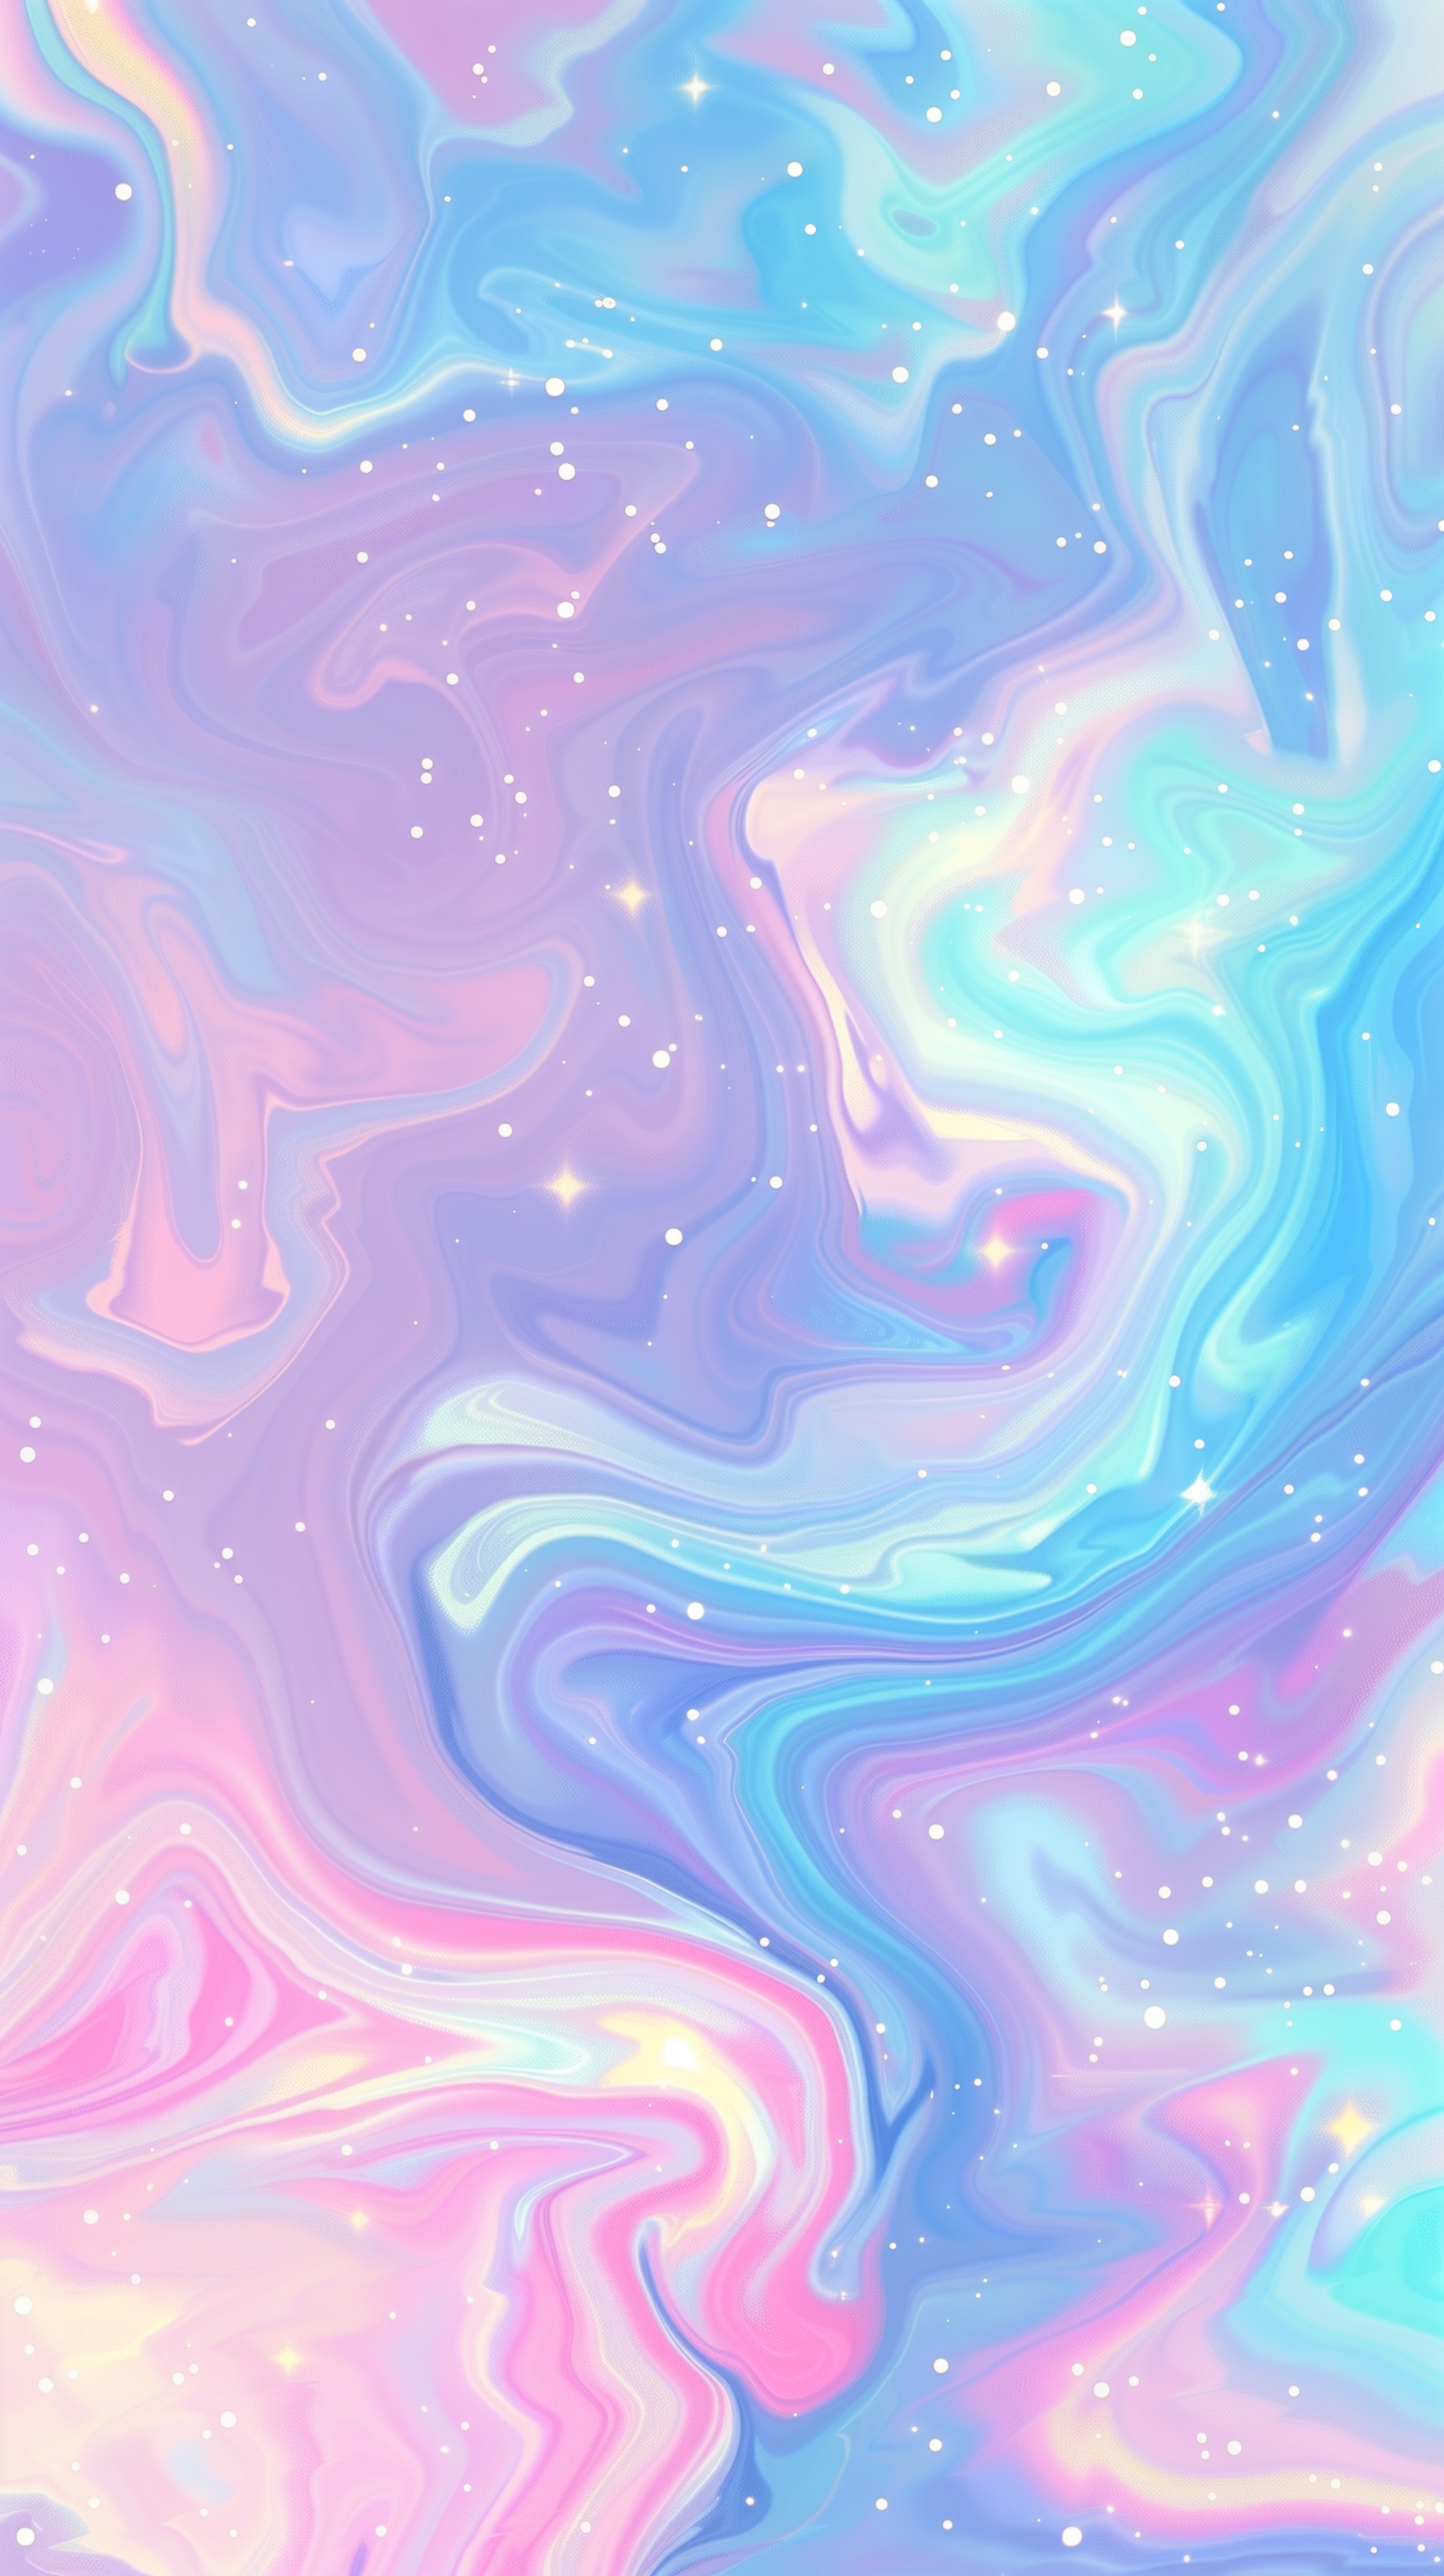 Colorful Swirls of Pink and Blue Tapetai[68dfb80c26194abb9aca]